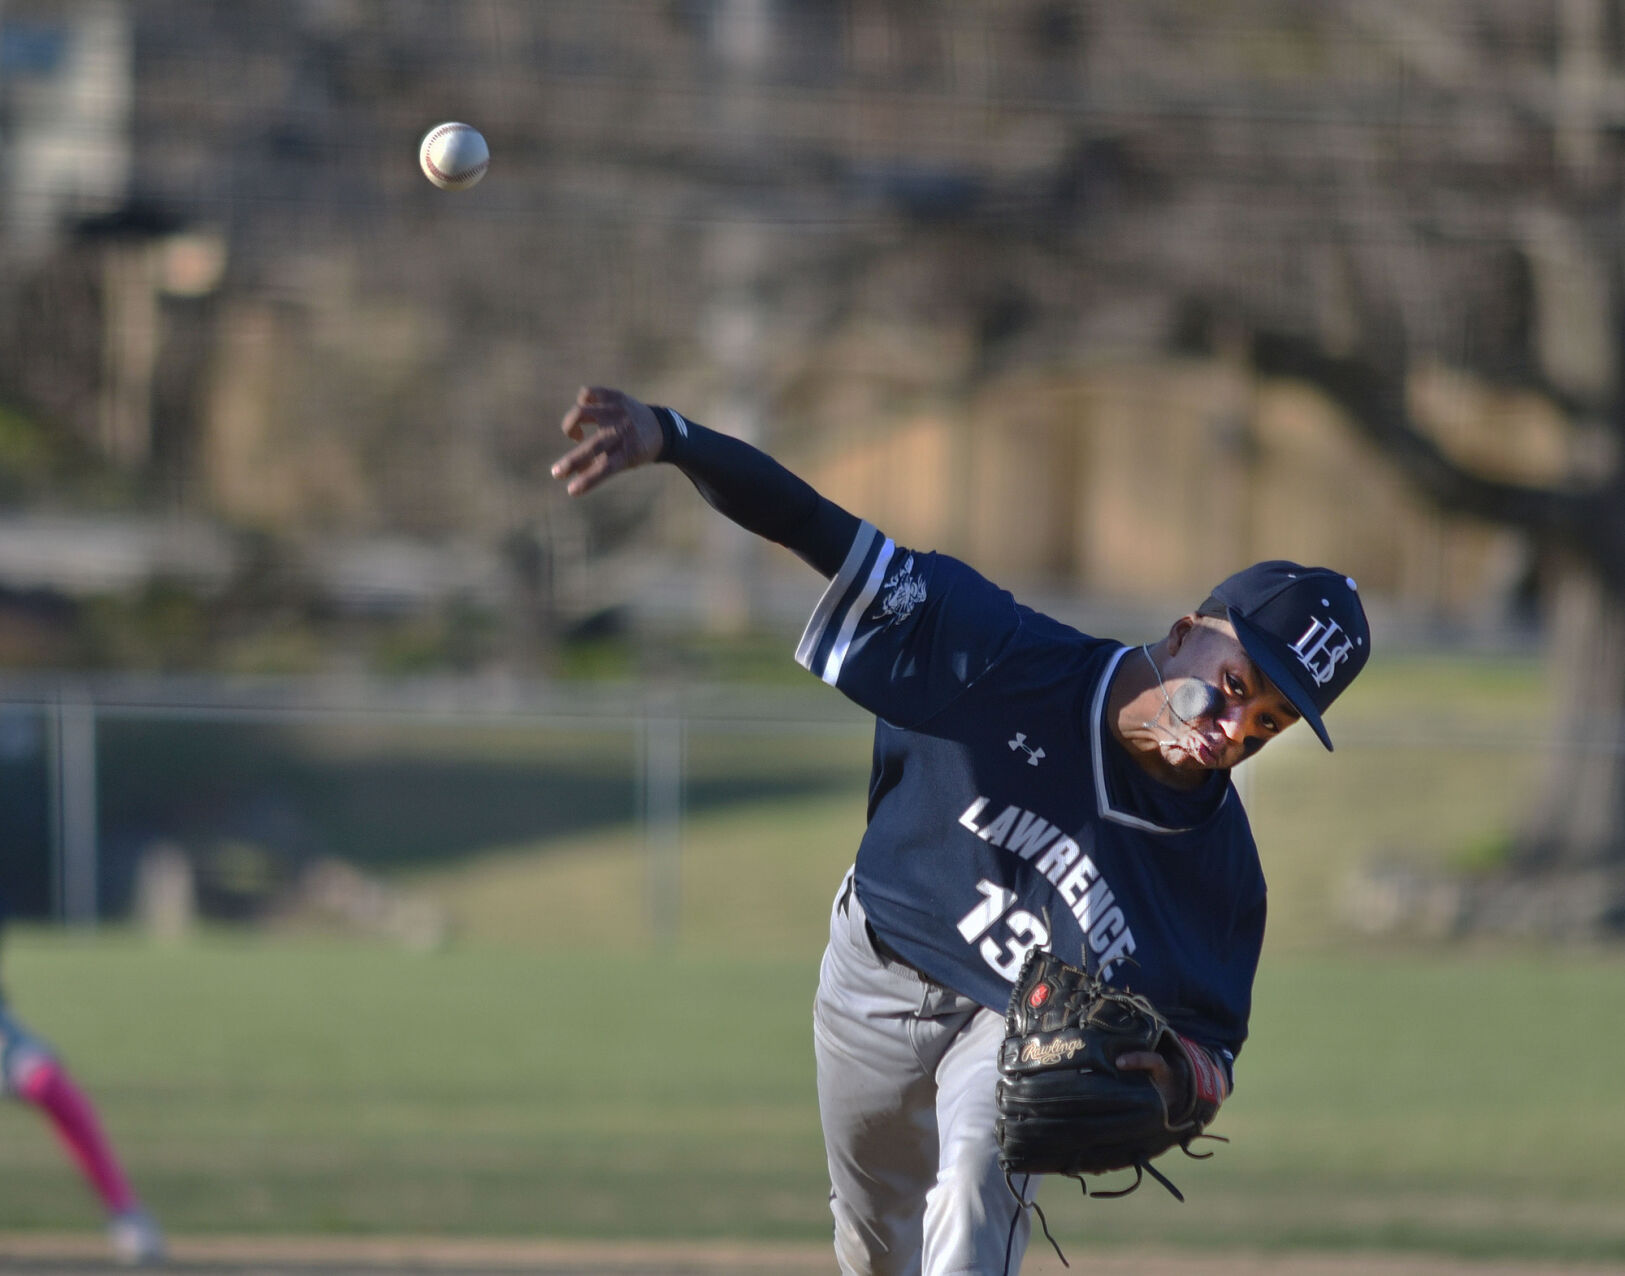 Lawrence get win by forfeit: Andover pitcher needed another day’s rest